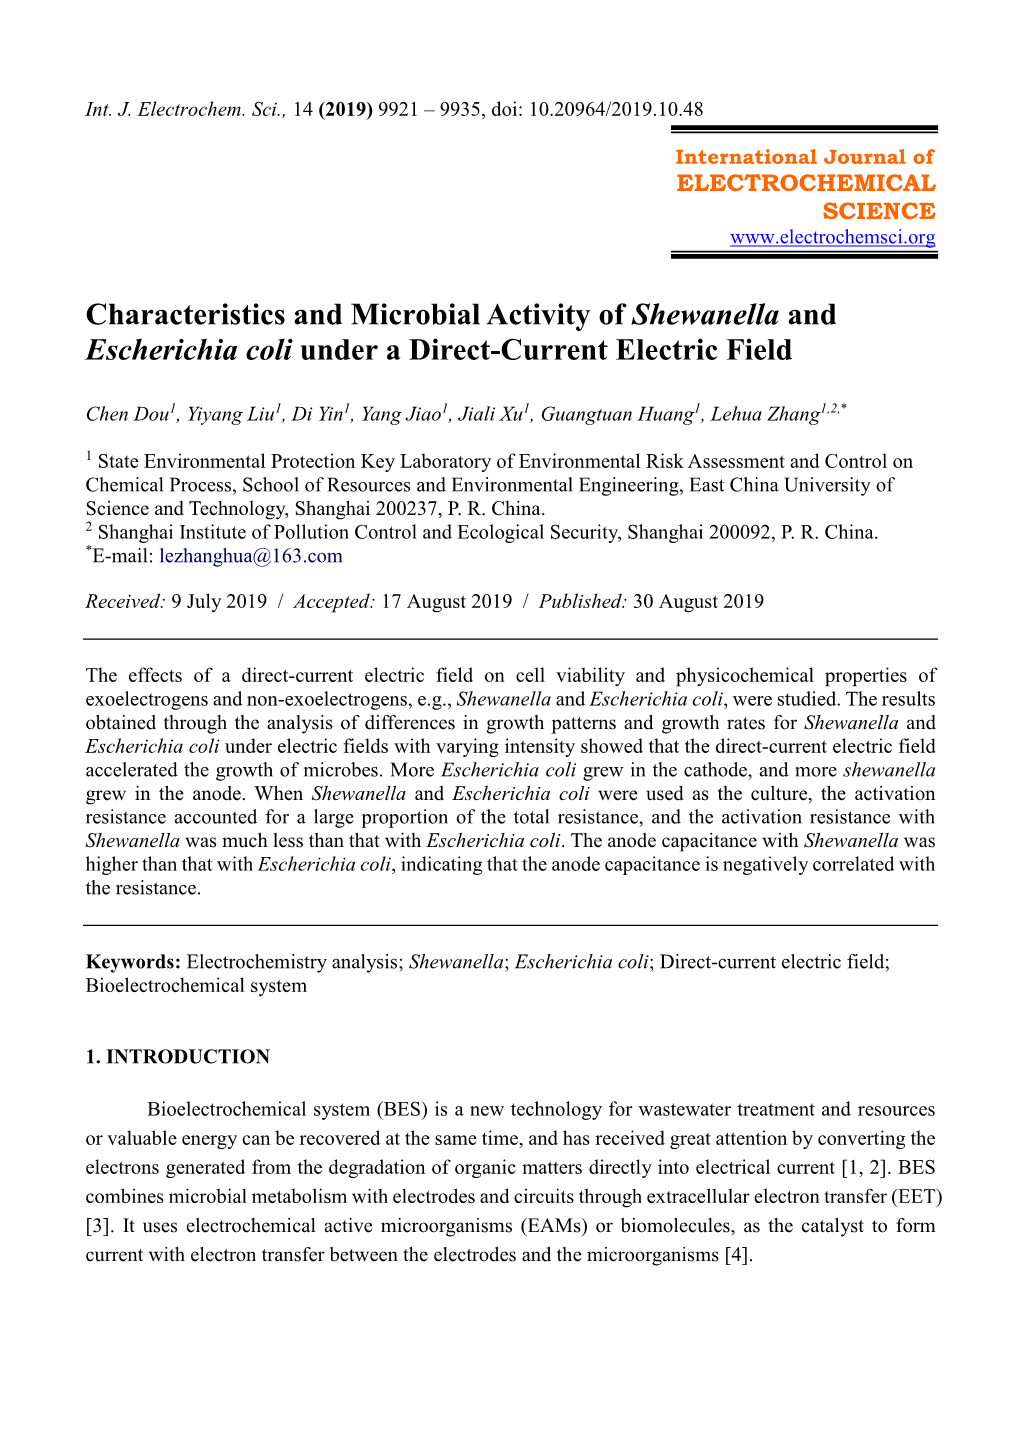 Characteristics and Microbial Activity of Shewanella and Escherichia Coli Under a Direct-Current Electric Field